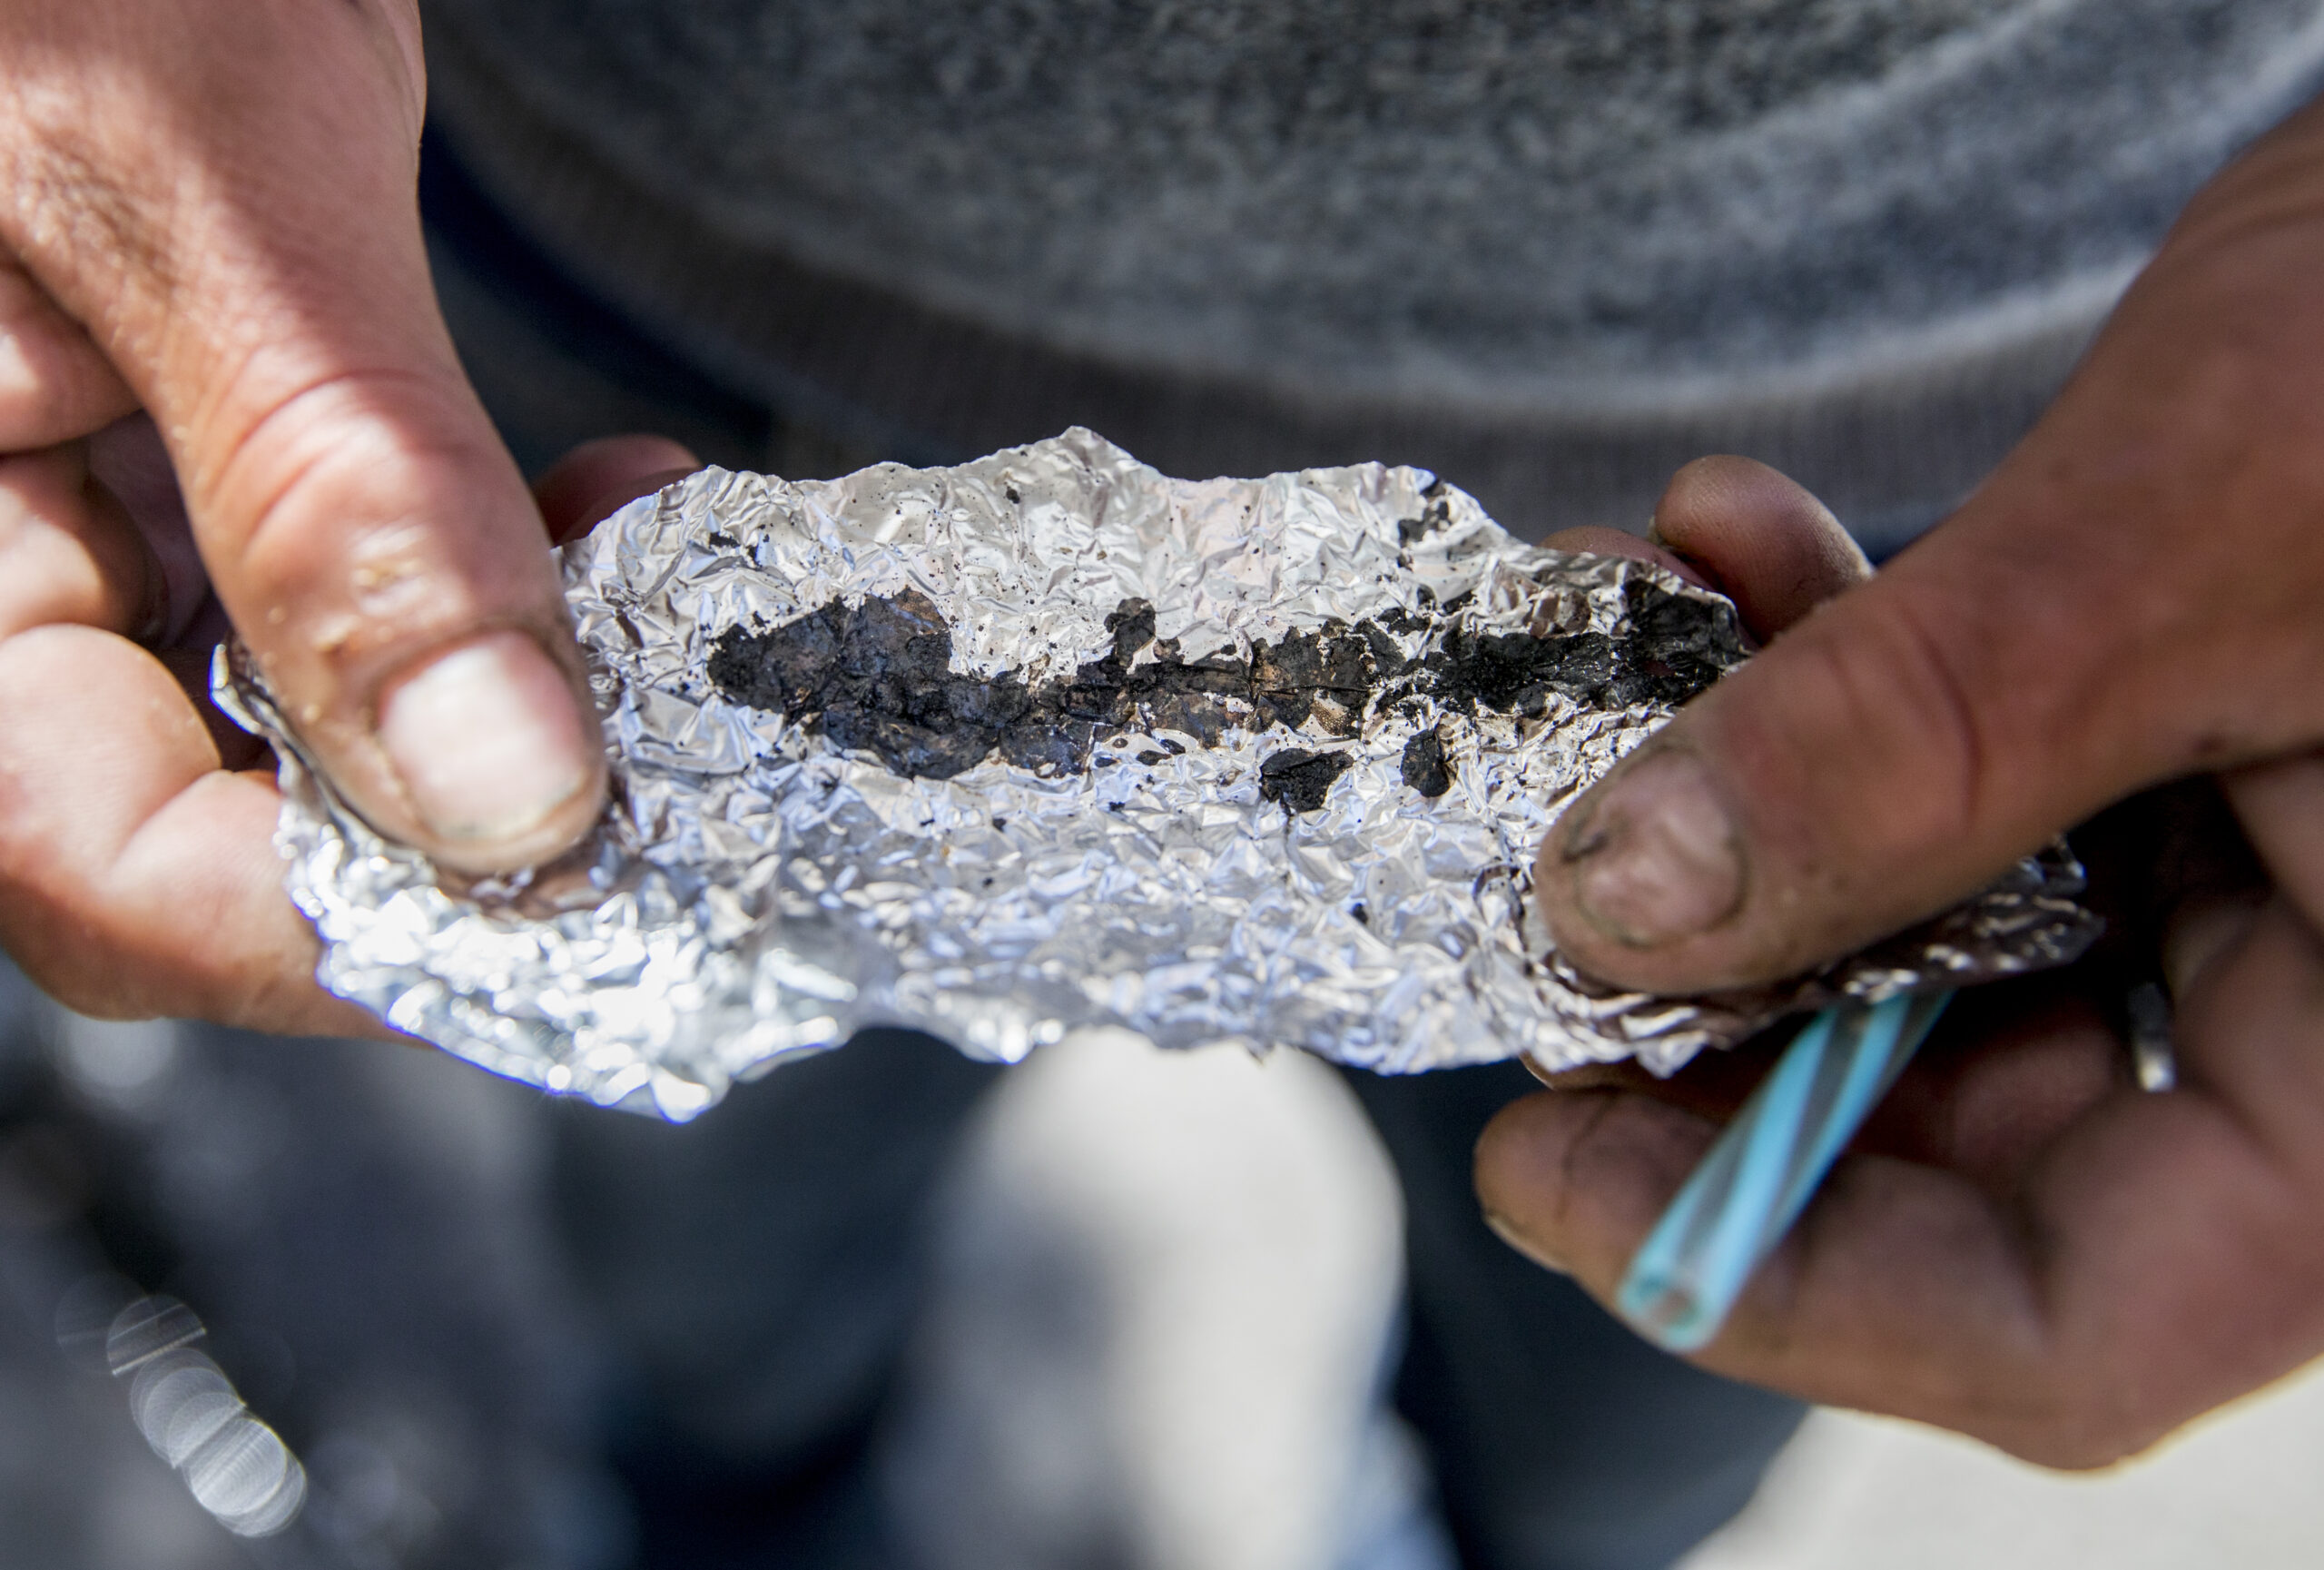 A person holding tin foil with drugs inside